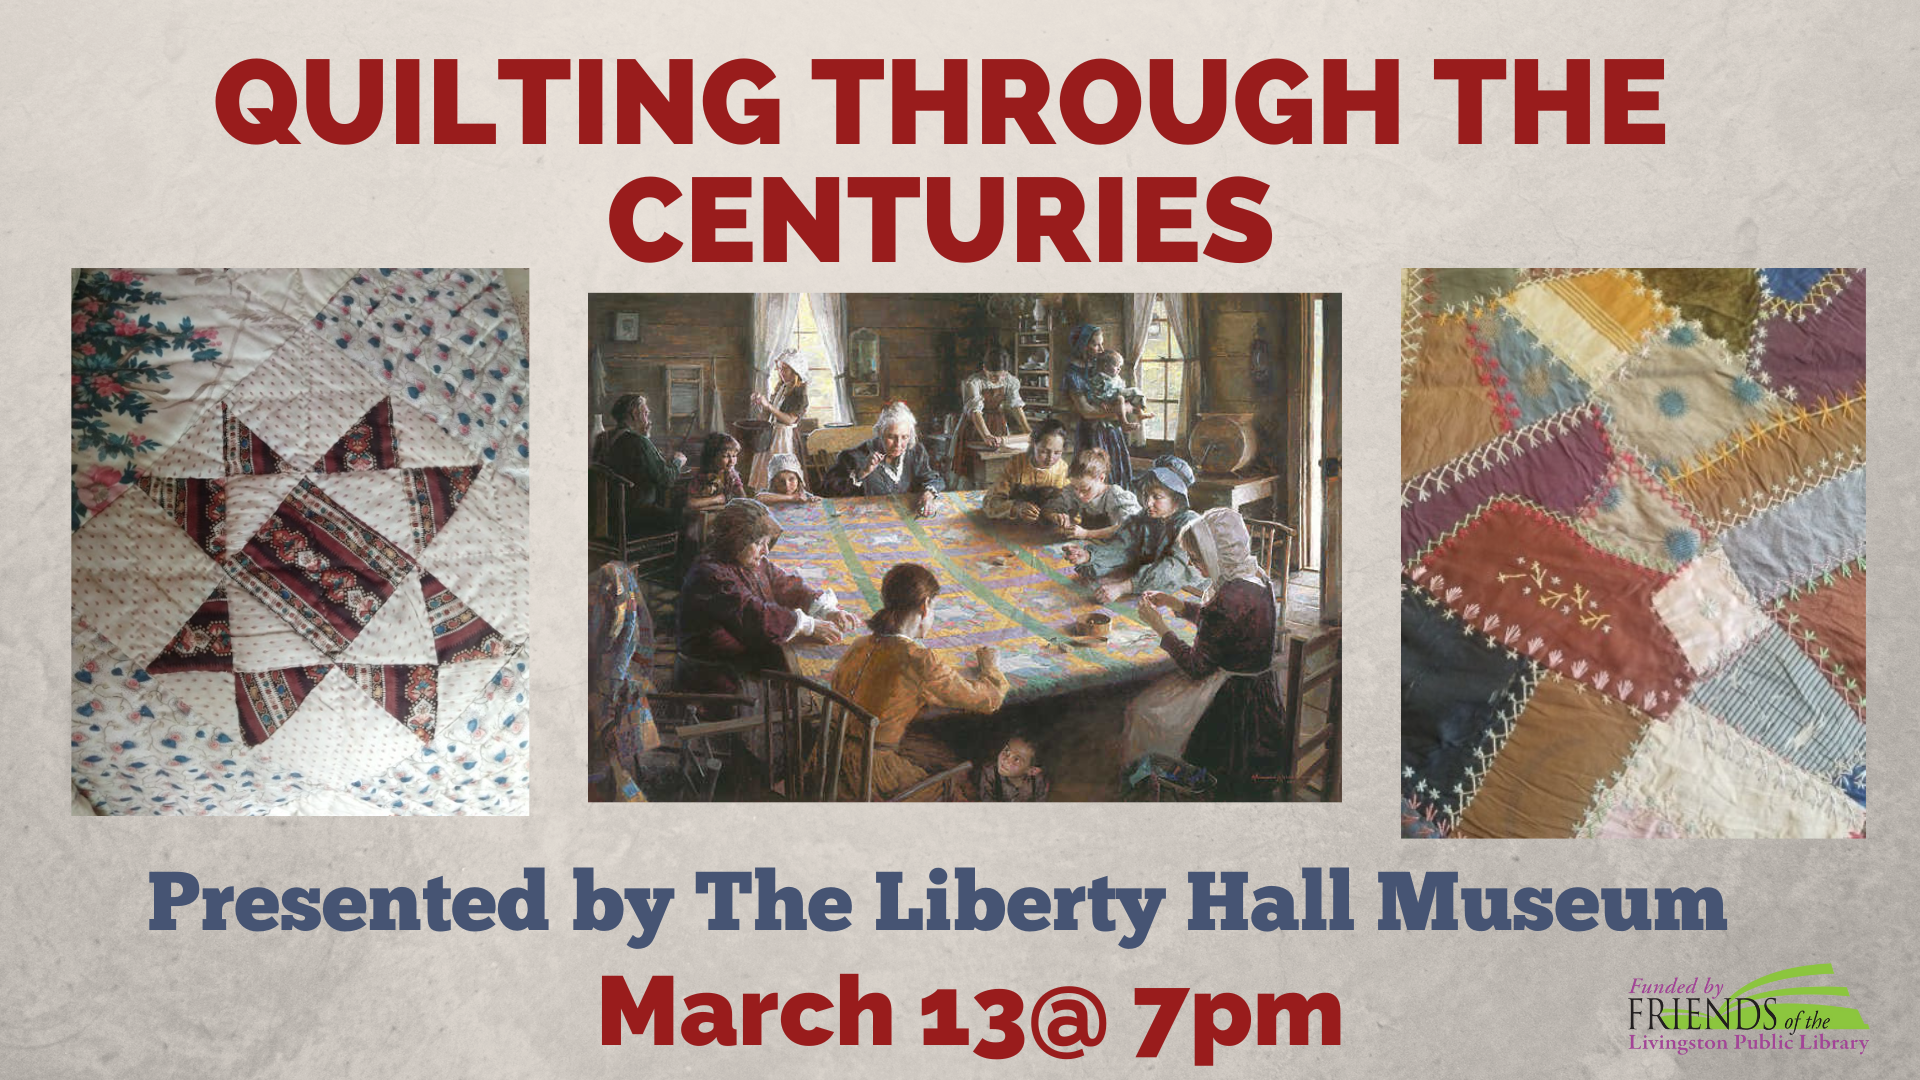 History of quilting by Liberty Hall Museum